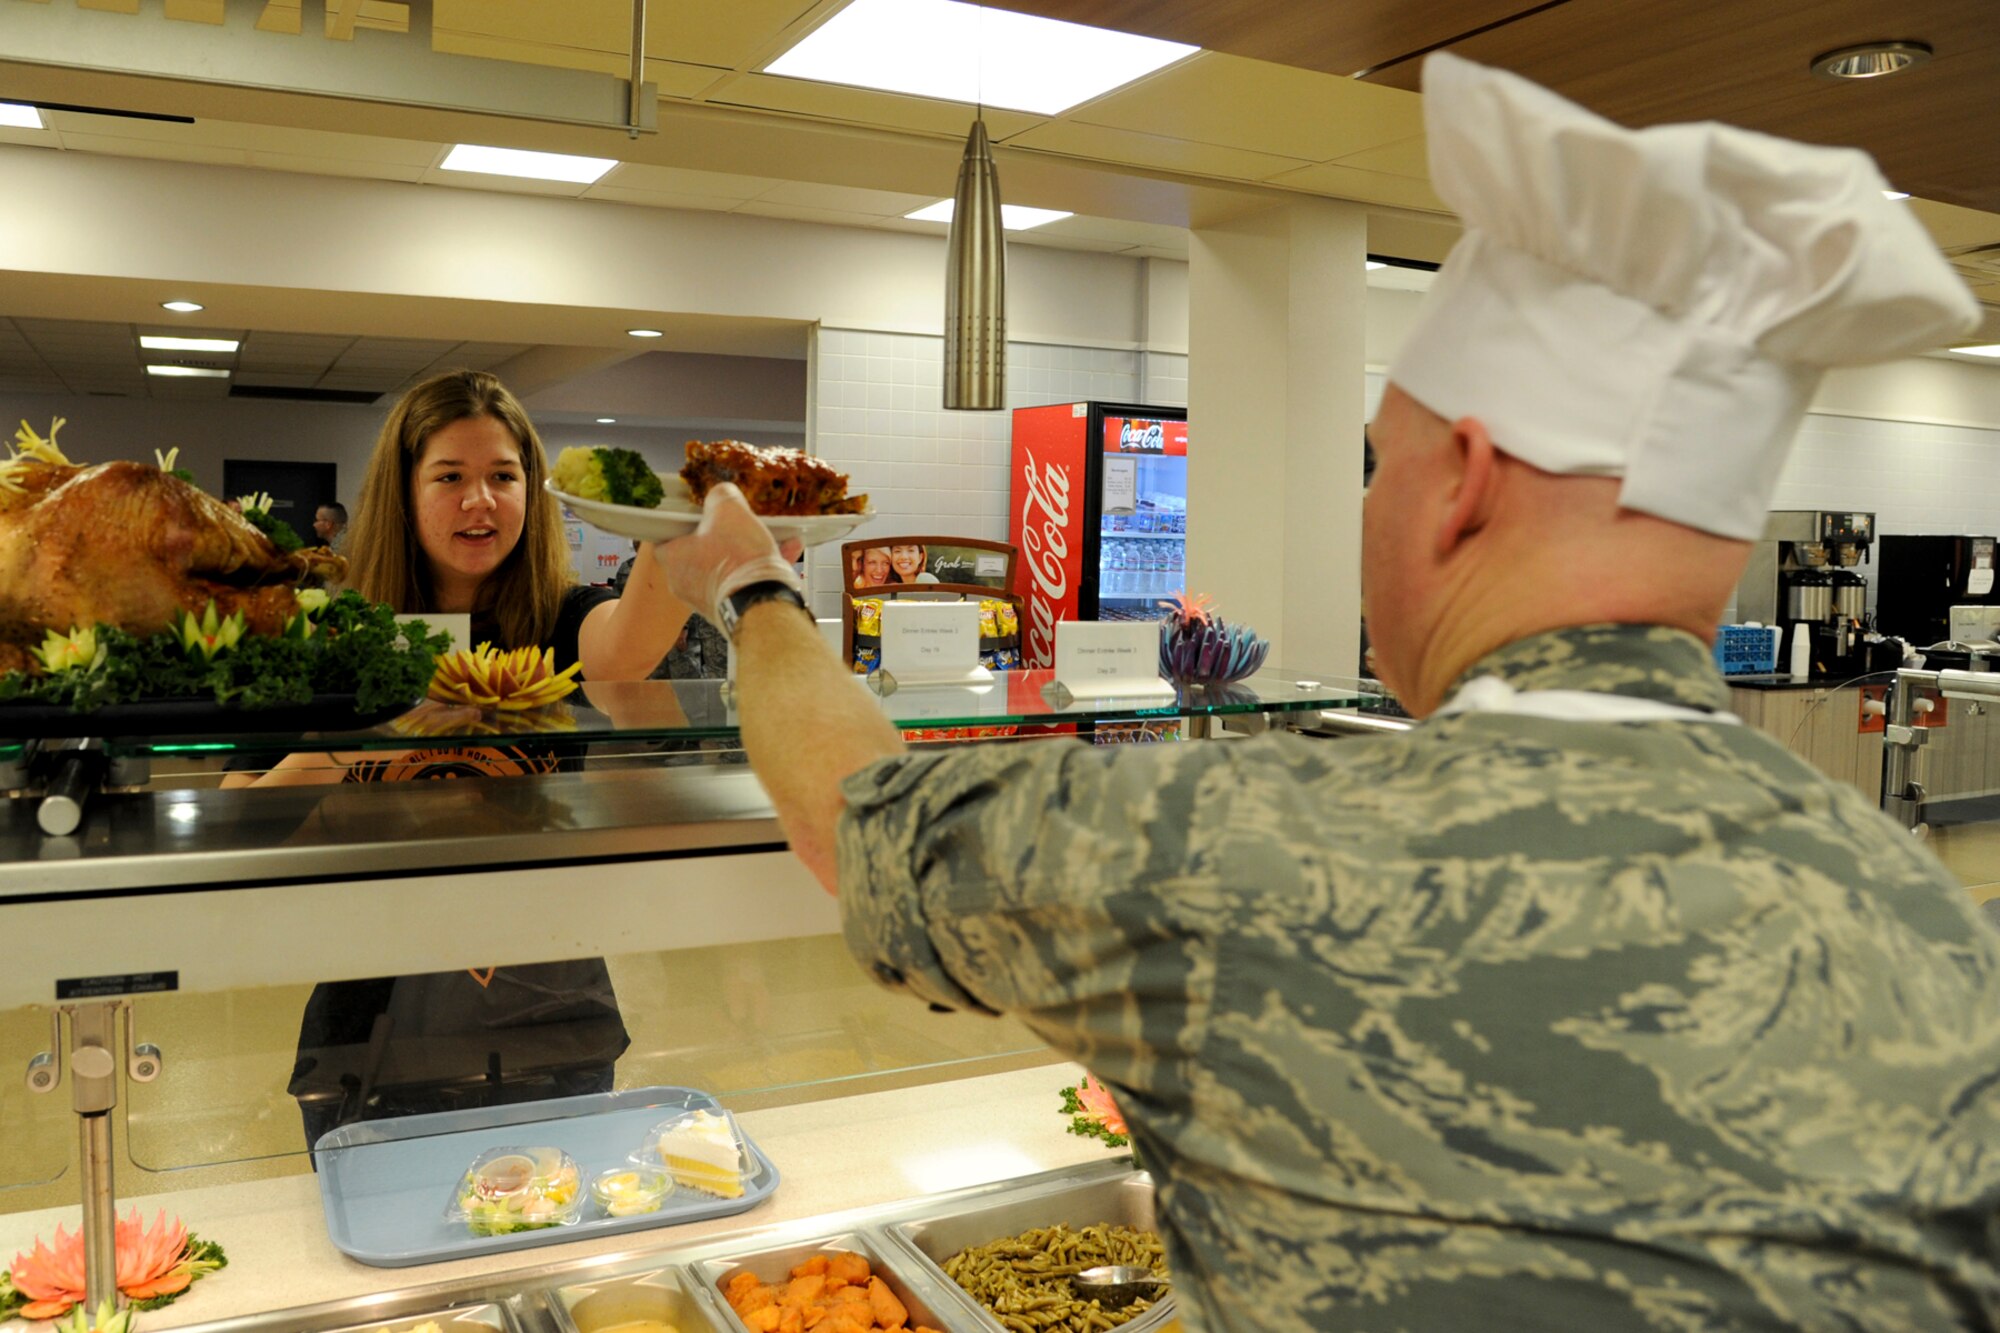 Maj. Daniel Willison, 2nd Maintenance Squadron commander, serves Airman 1st Class Alexis Zirbel, 2nd Operations Support Squadron, during the Red River Dining Facility Thanksgiving lunch on Barksdale Air Force Base, La., Nov. 27, 2014. More than twenty base leaders volunteered to serve food to Airmen, retirees and dependents. (U.S. Air Force photo/ Senior Airman Jannelle Dickey)